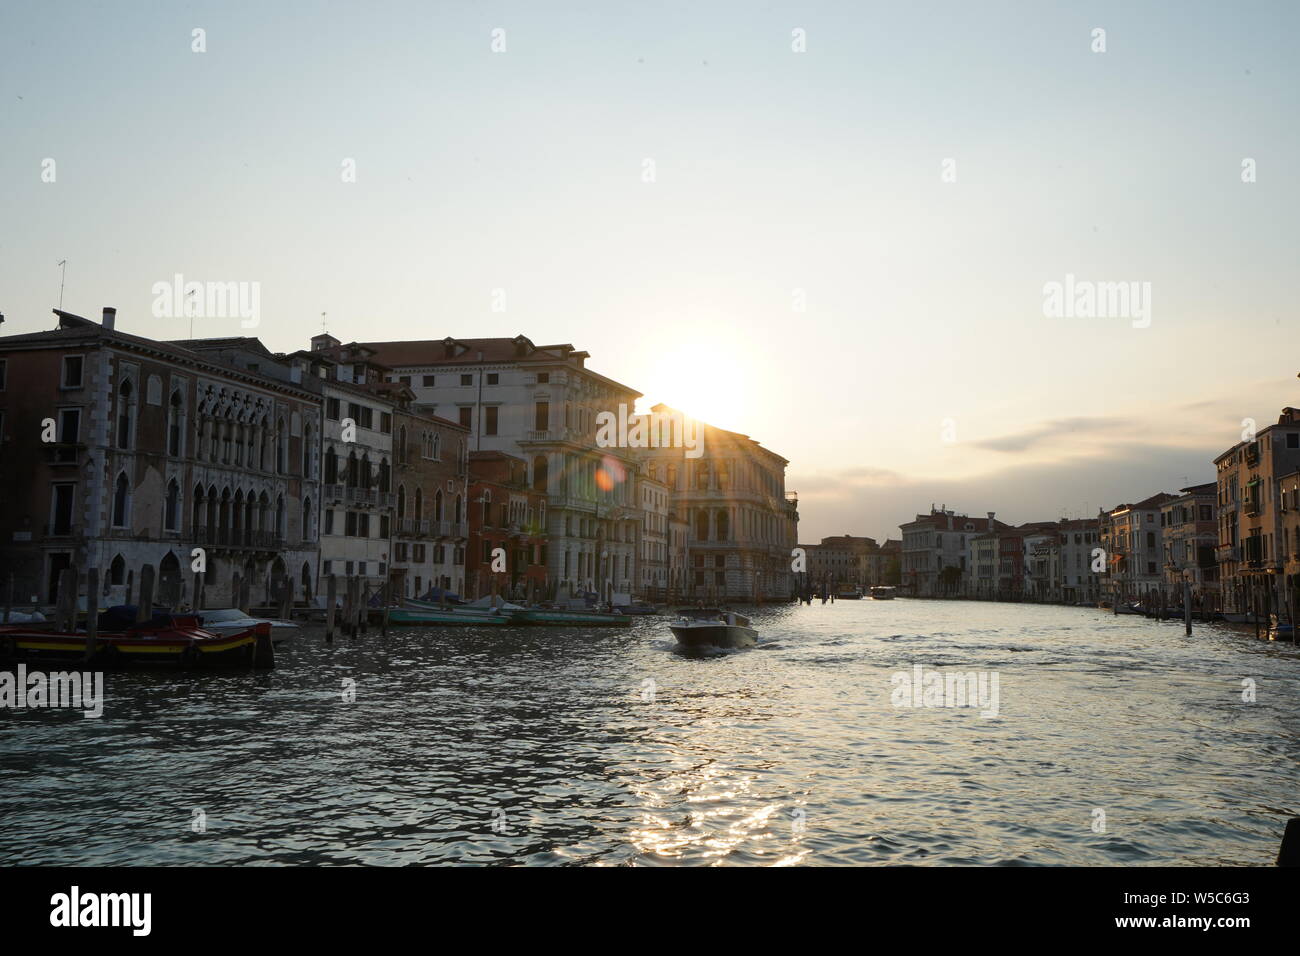 Venice, Italy - Iconic Italian city on the Adriatic Sea. View of the Grand Canal. An incredible European vacation destination. Stock Photo